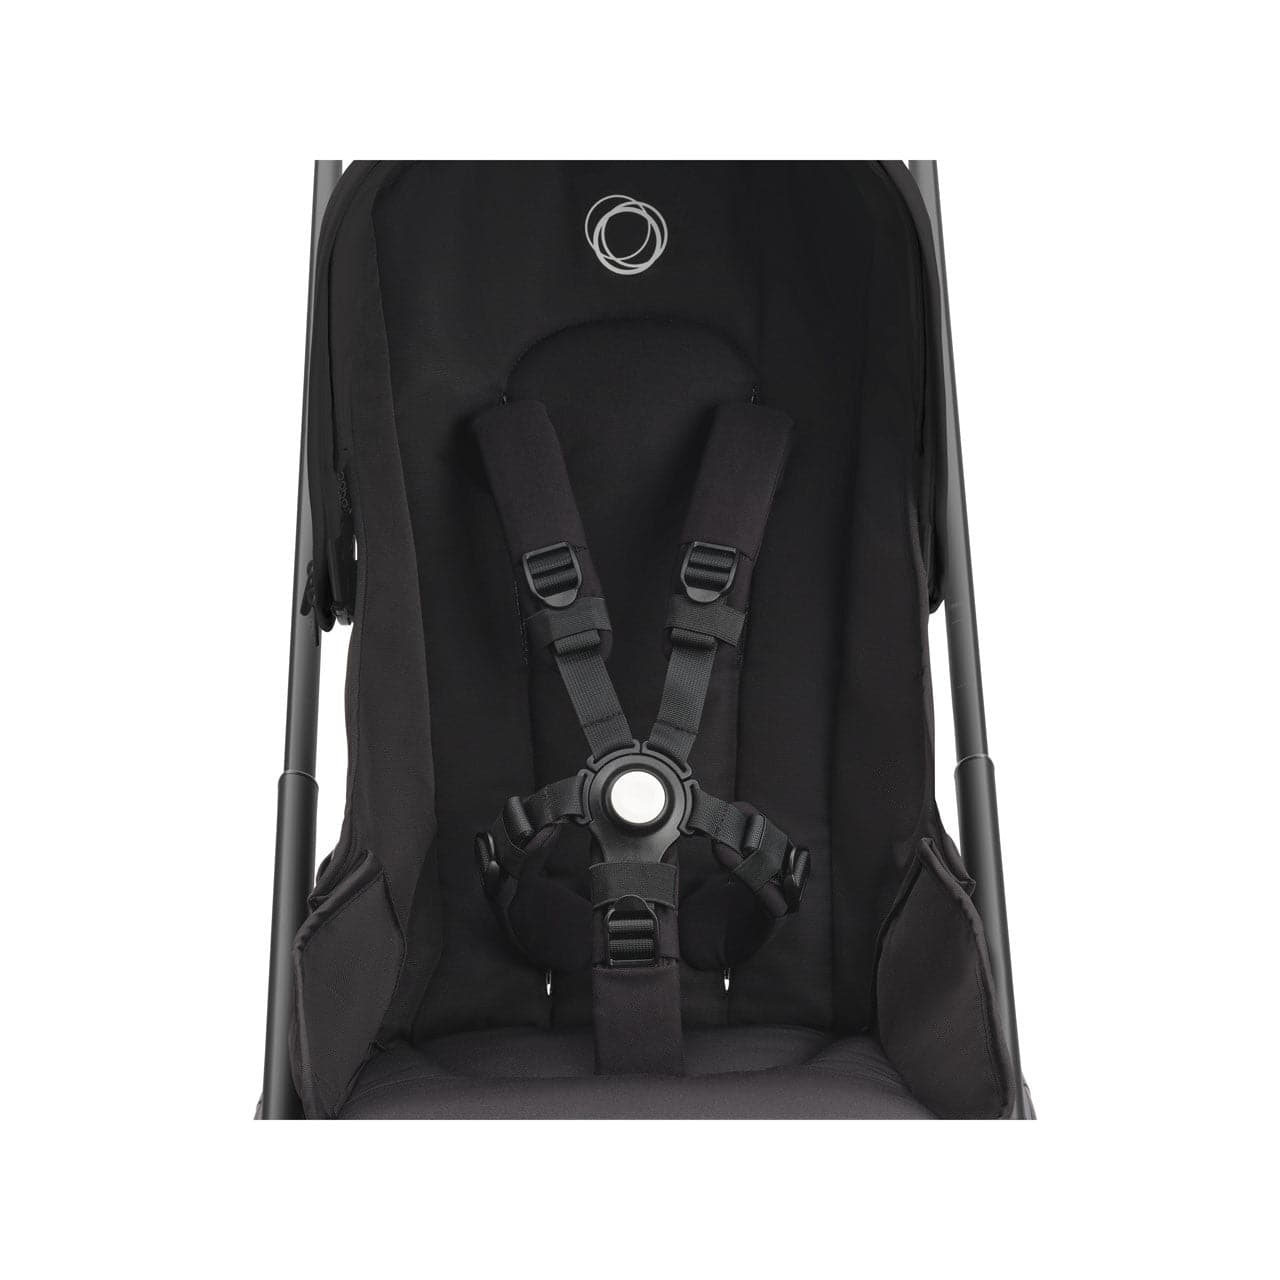 Bugaboo Dragonfly Ultimate Travel System Bundle - Forest Green - For Your Little One